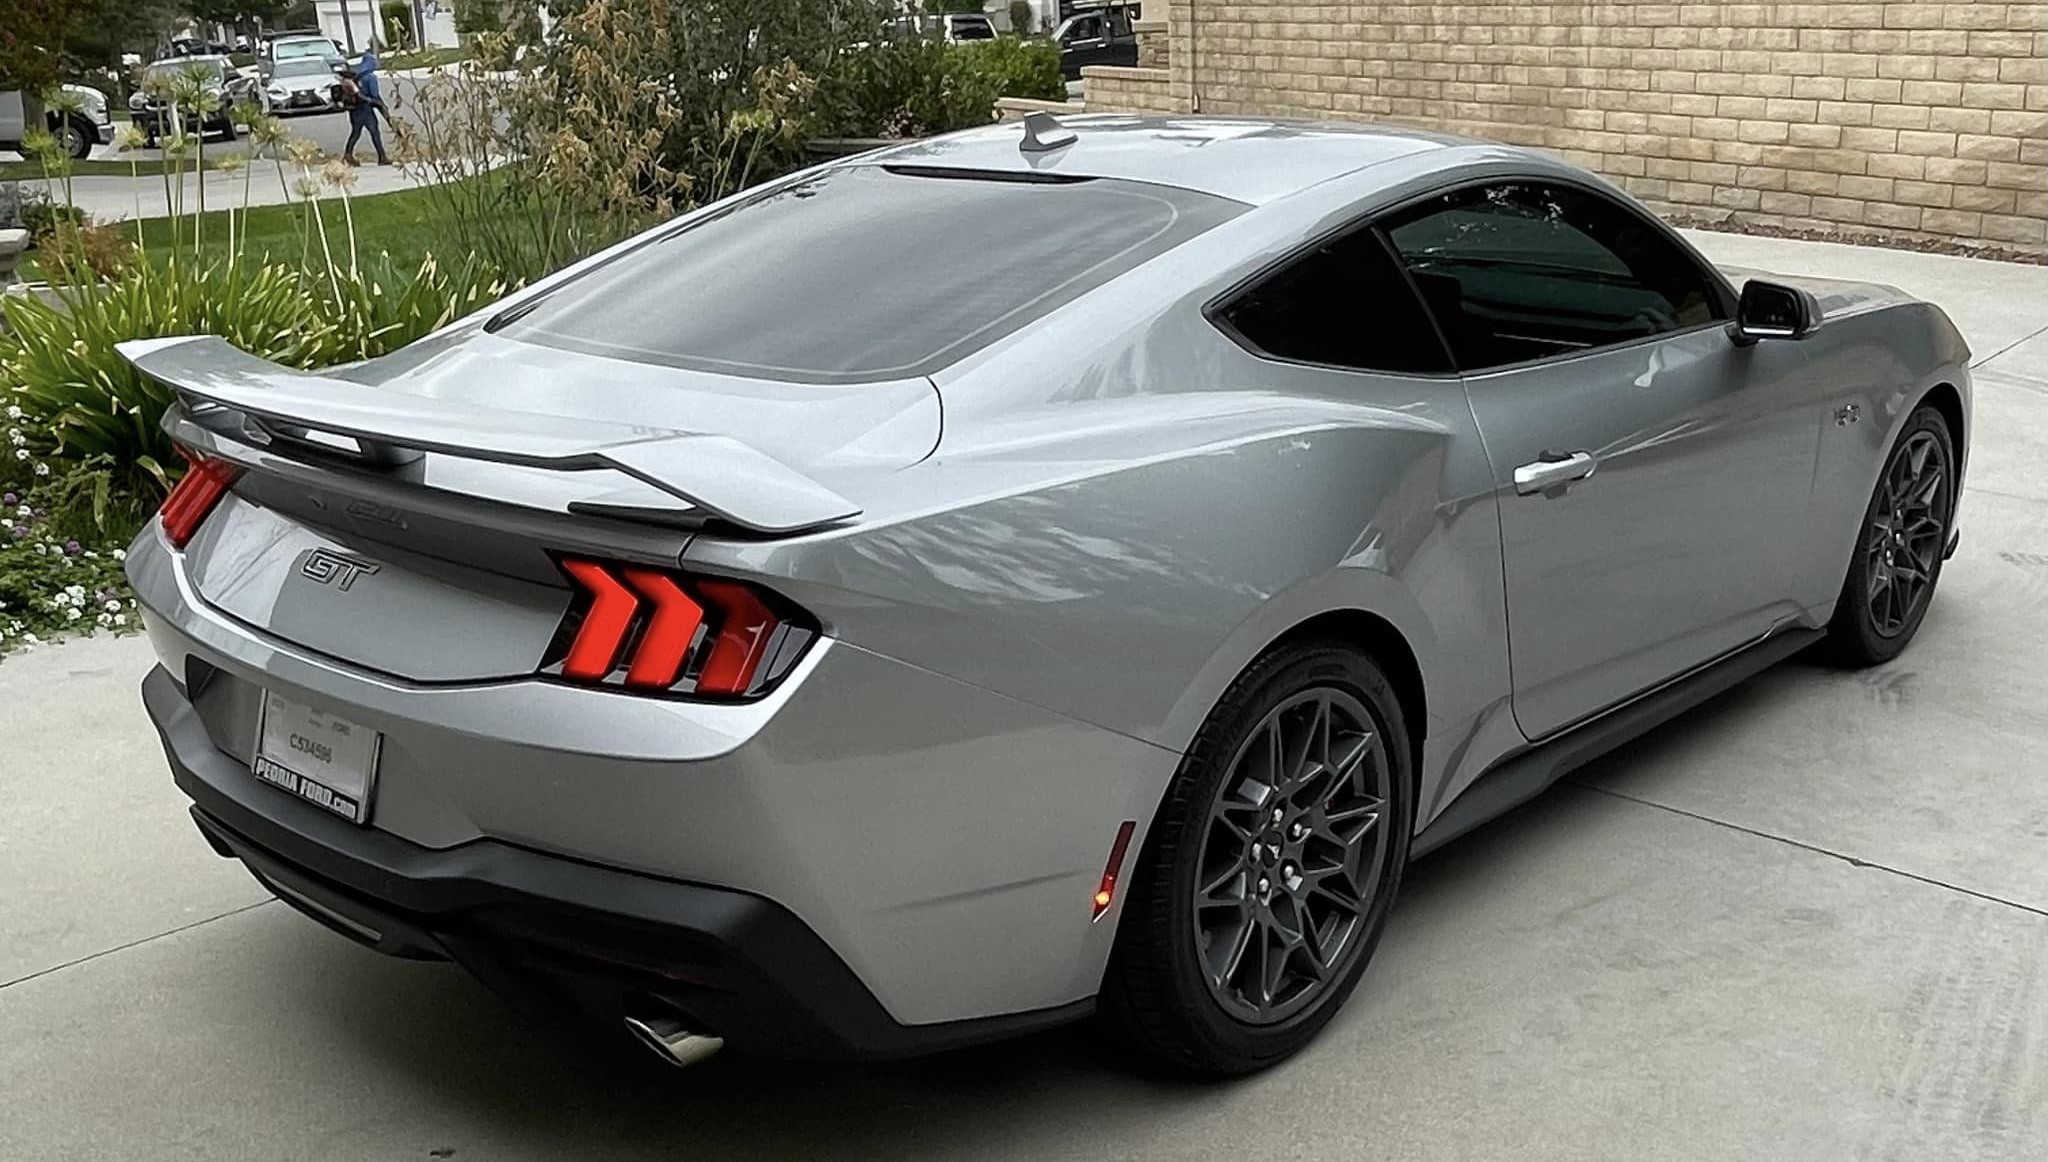 S650 Mustang Official ICONIC SILVER Mustang S650 Thread Iconic 9